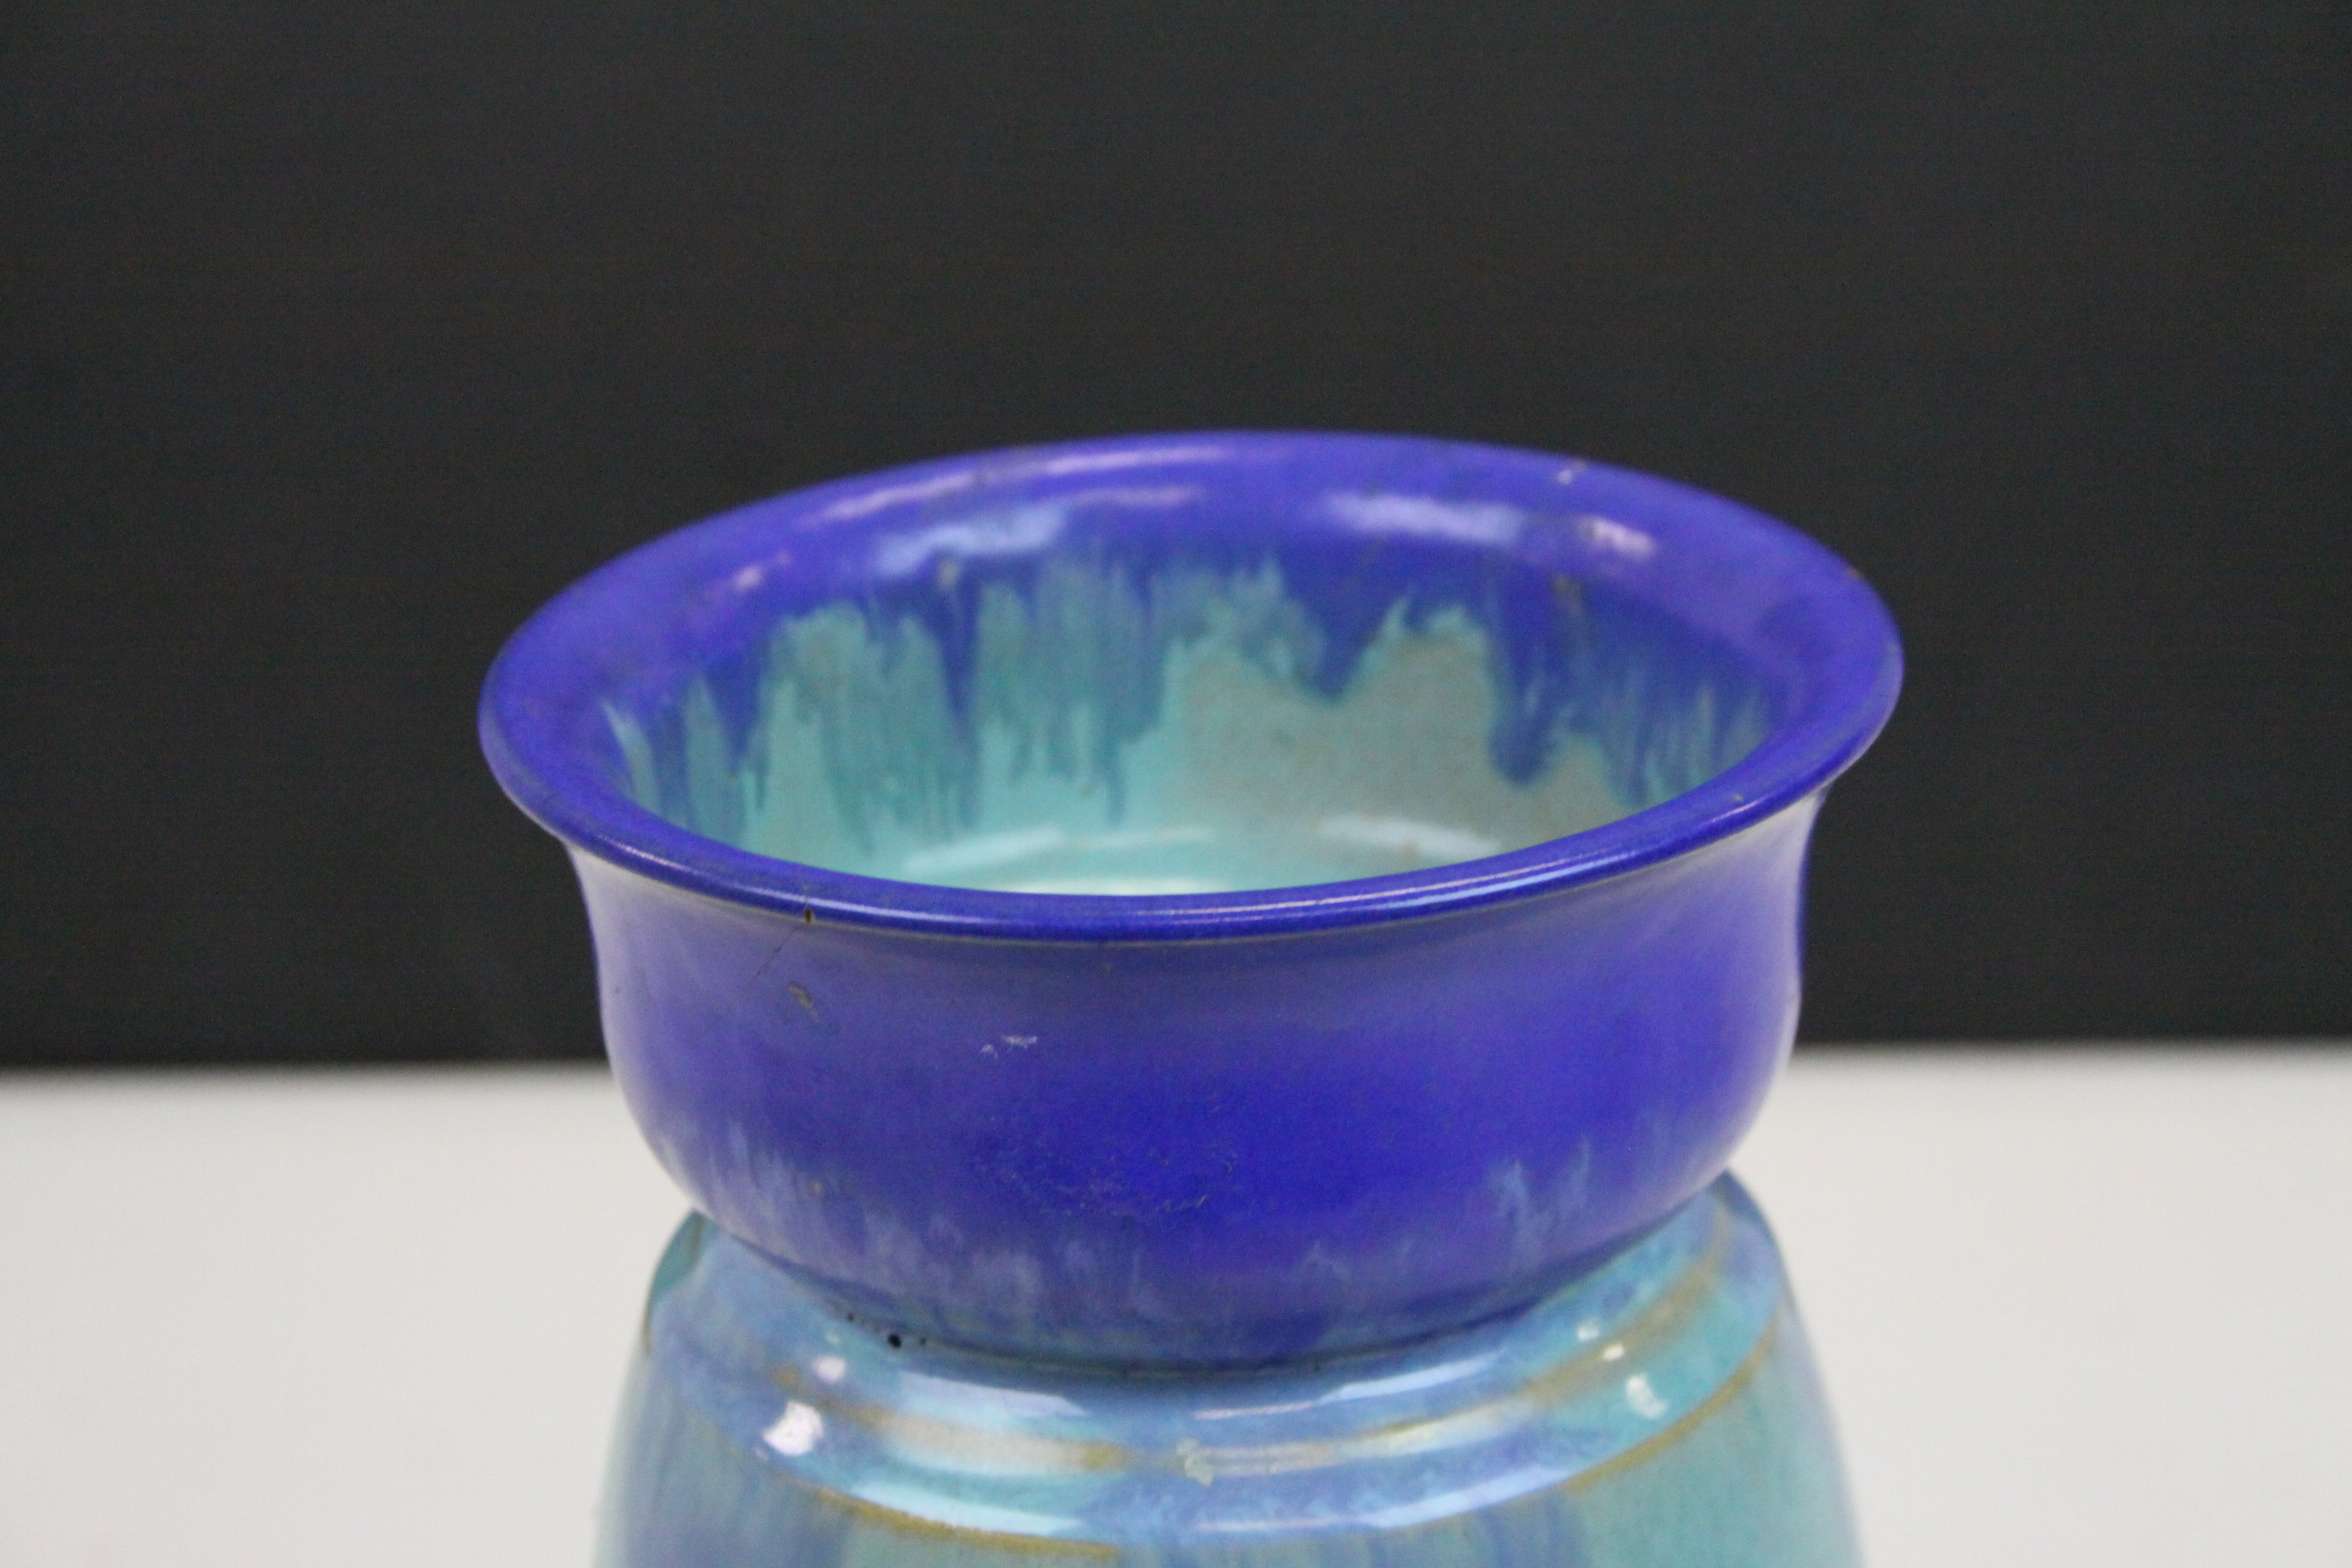 An Art Deco Edna Best fruit patterned bowl and blue ground 20th century vase - Image 5 of 6